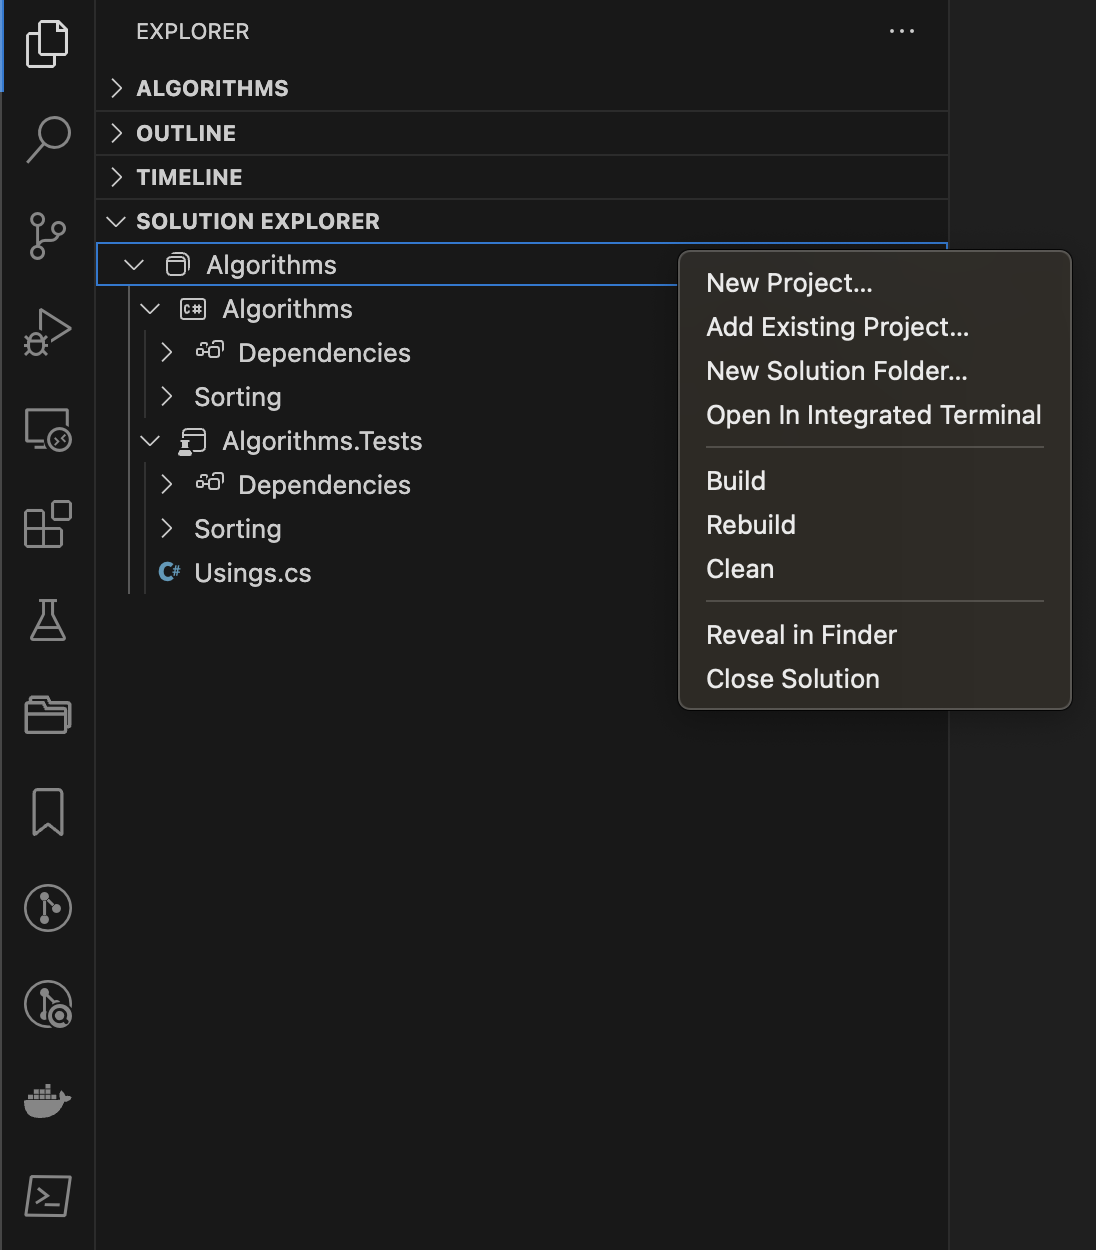 Solution Explorer context menu with options to add new project